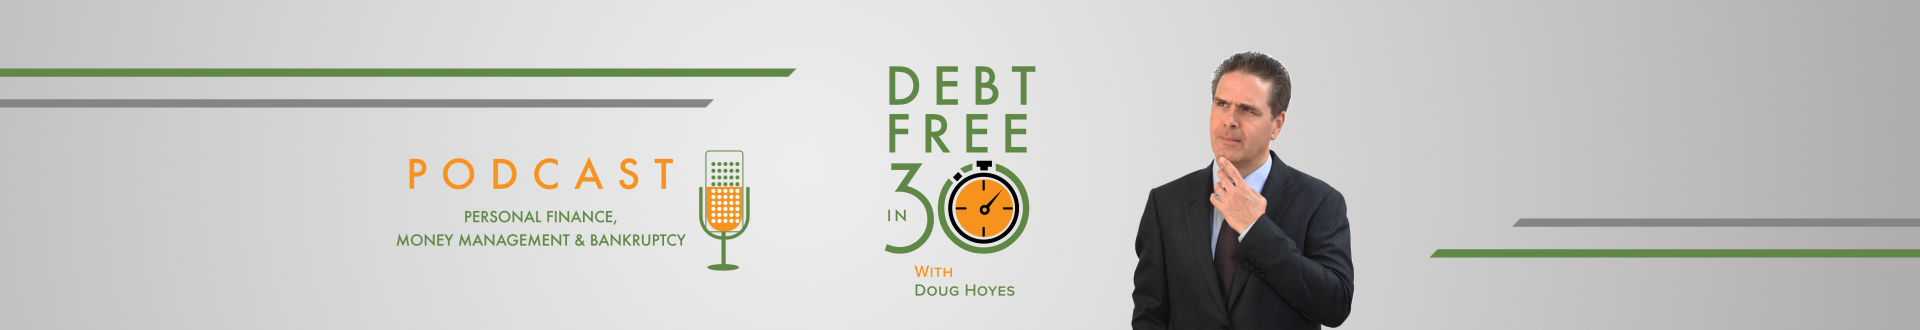 Debt Free in 30 Podcast Archive - Page 35